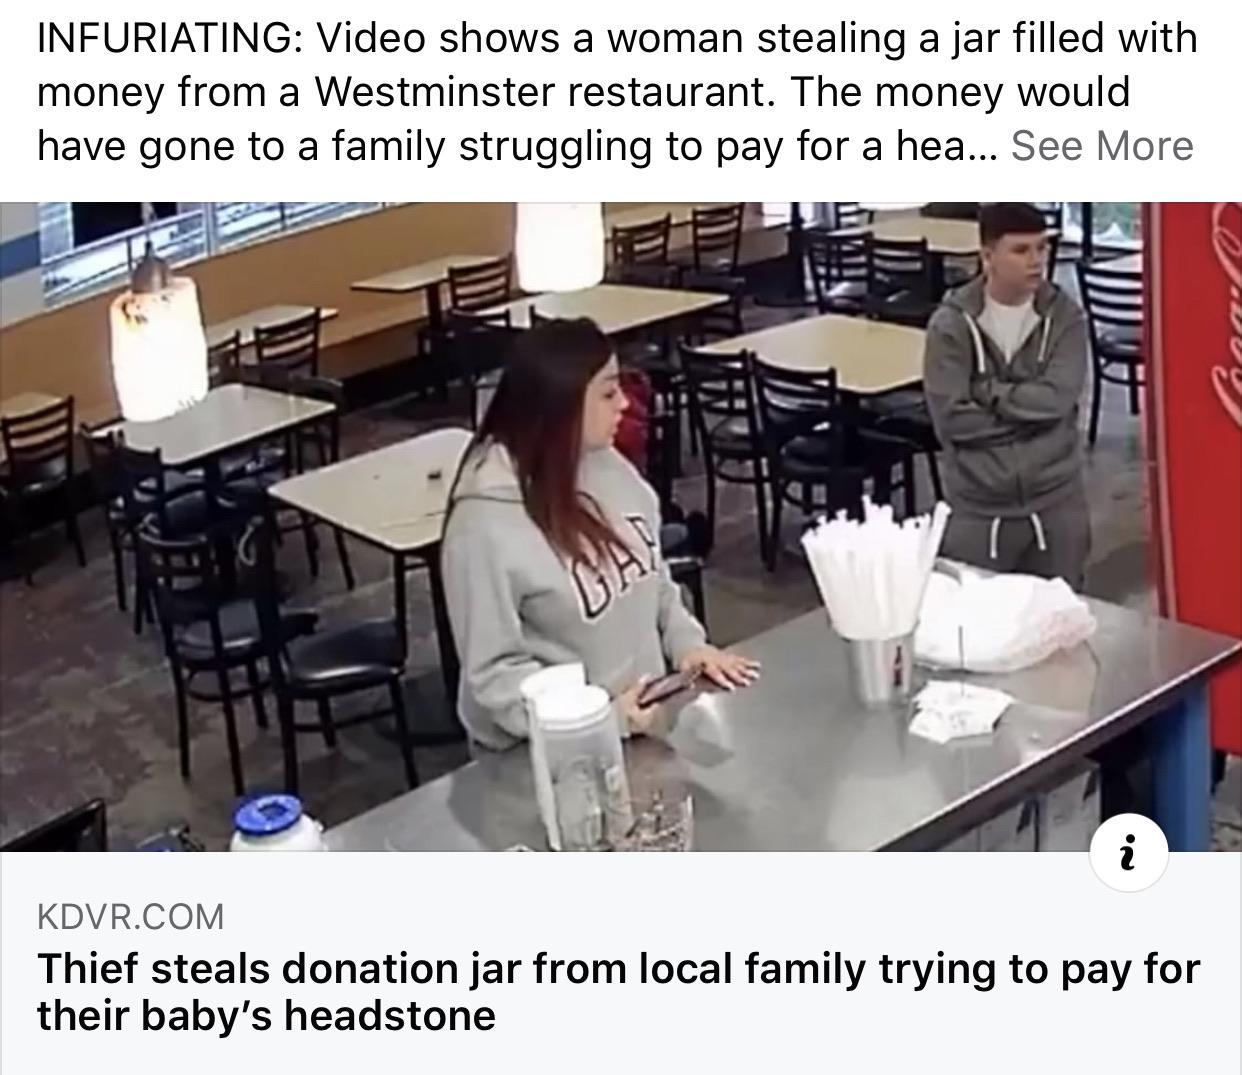 learning - Infuriating Video shows a woman stealing a jar filled with money from a Westminster restaurant. The money would have gone to a family struggling to pay for a hea... See More Kdvr.Com Thief steals donation jar from local family trying to pay for